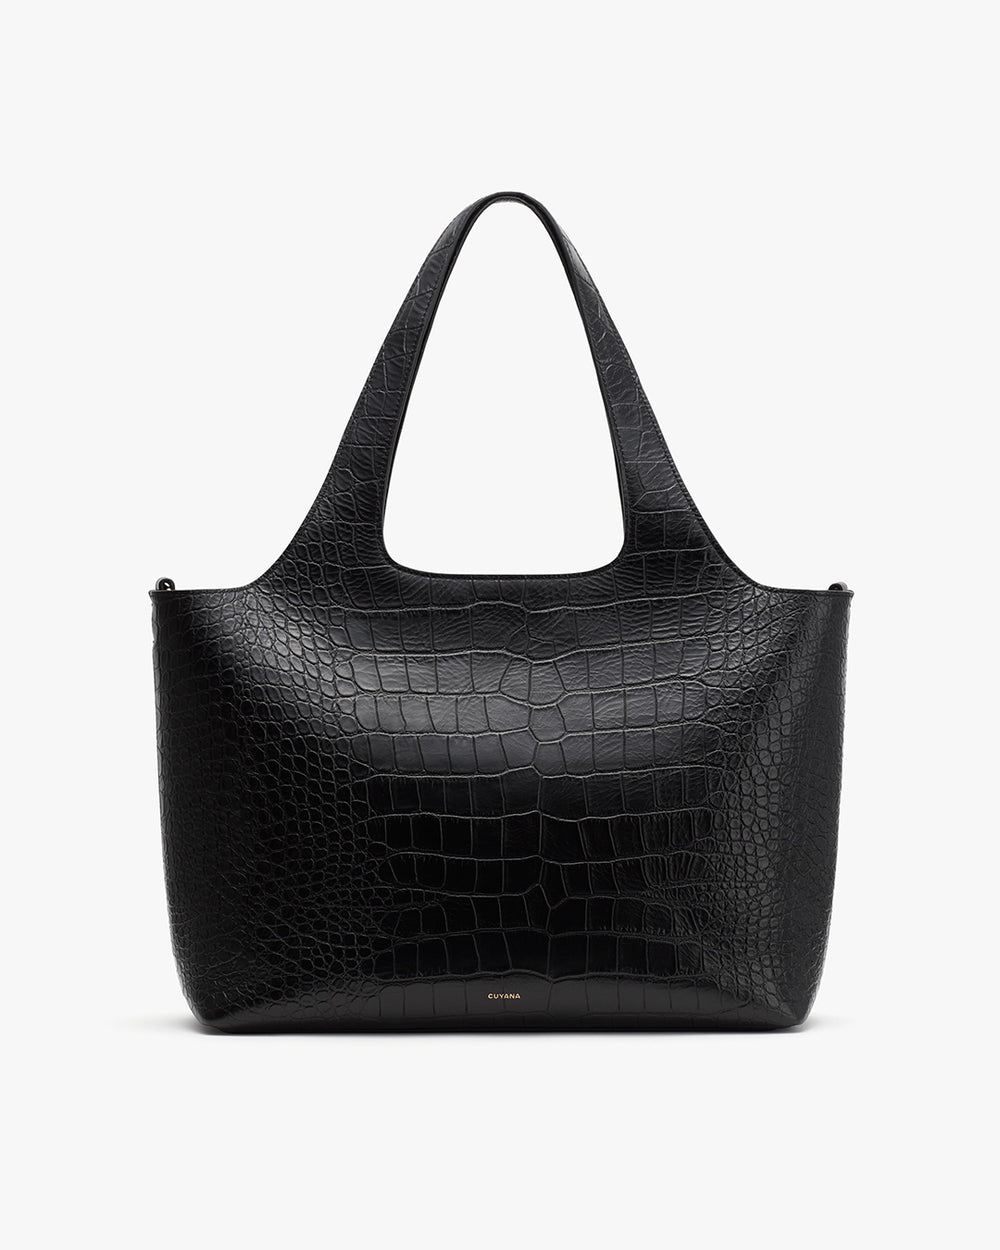 System Tote 16-inch (Croco) – Cuyana